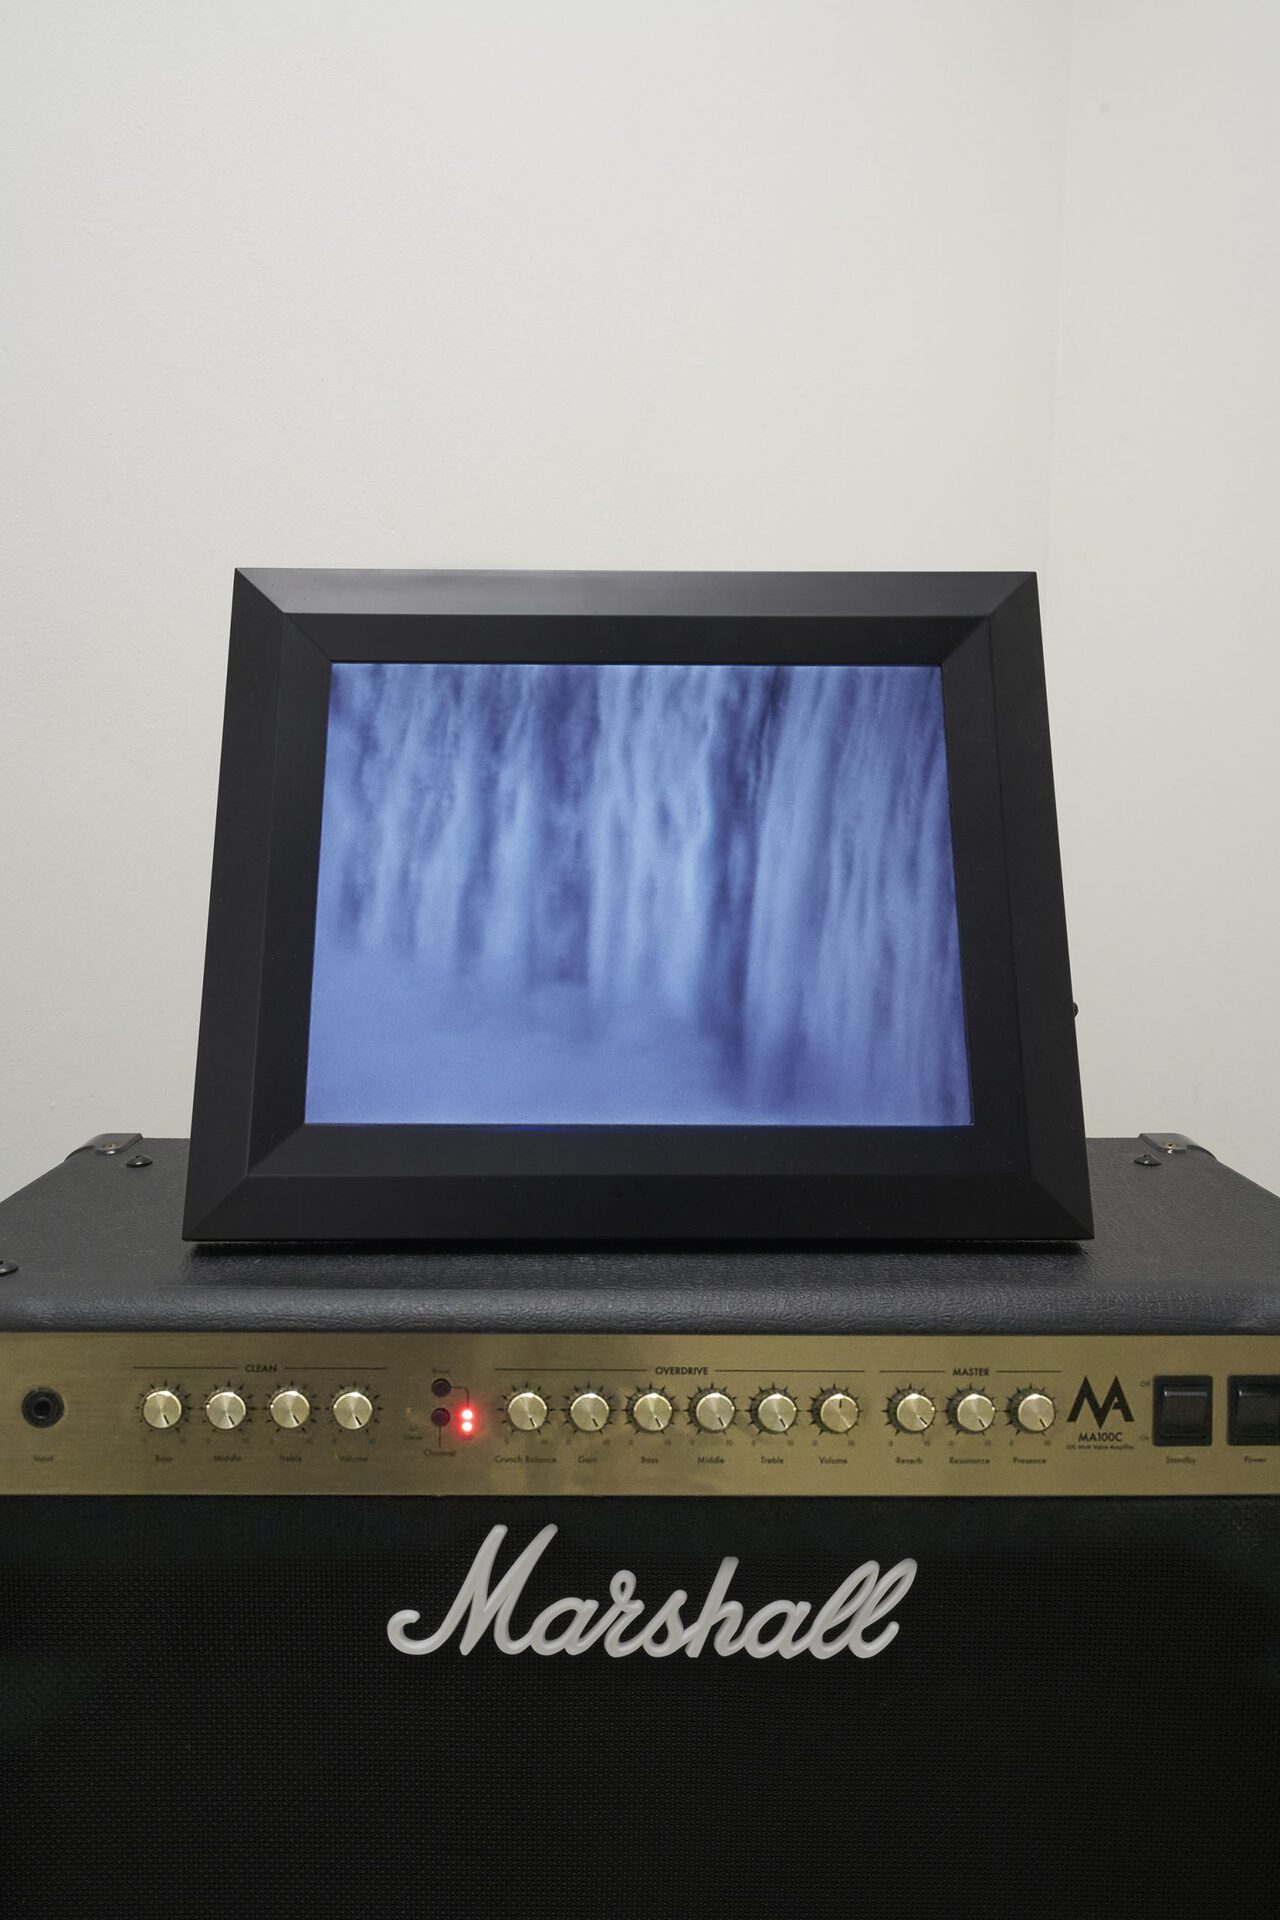 Haroon Mirza After the Big Bang, 2014 Digital picture frame, Marshall amp Marshallamp: 51 x 66 x 27 cm; LCDscreen: 34 x 40x 4 cm Courtesy of Lisson Gallery Copyright of the artist Photo: Milena Wojhan